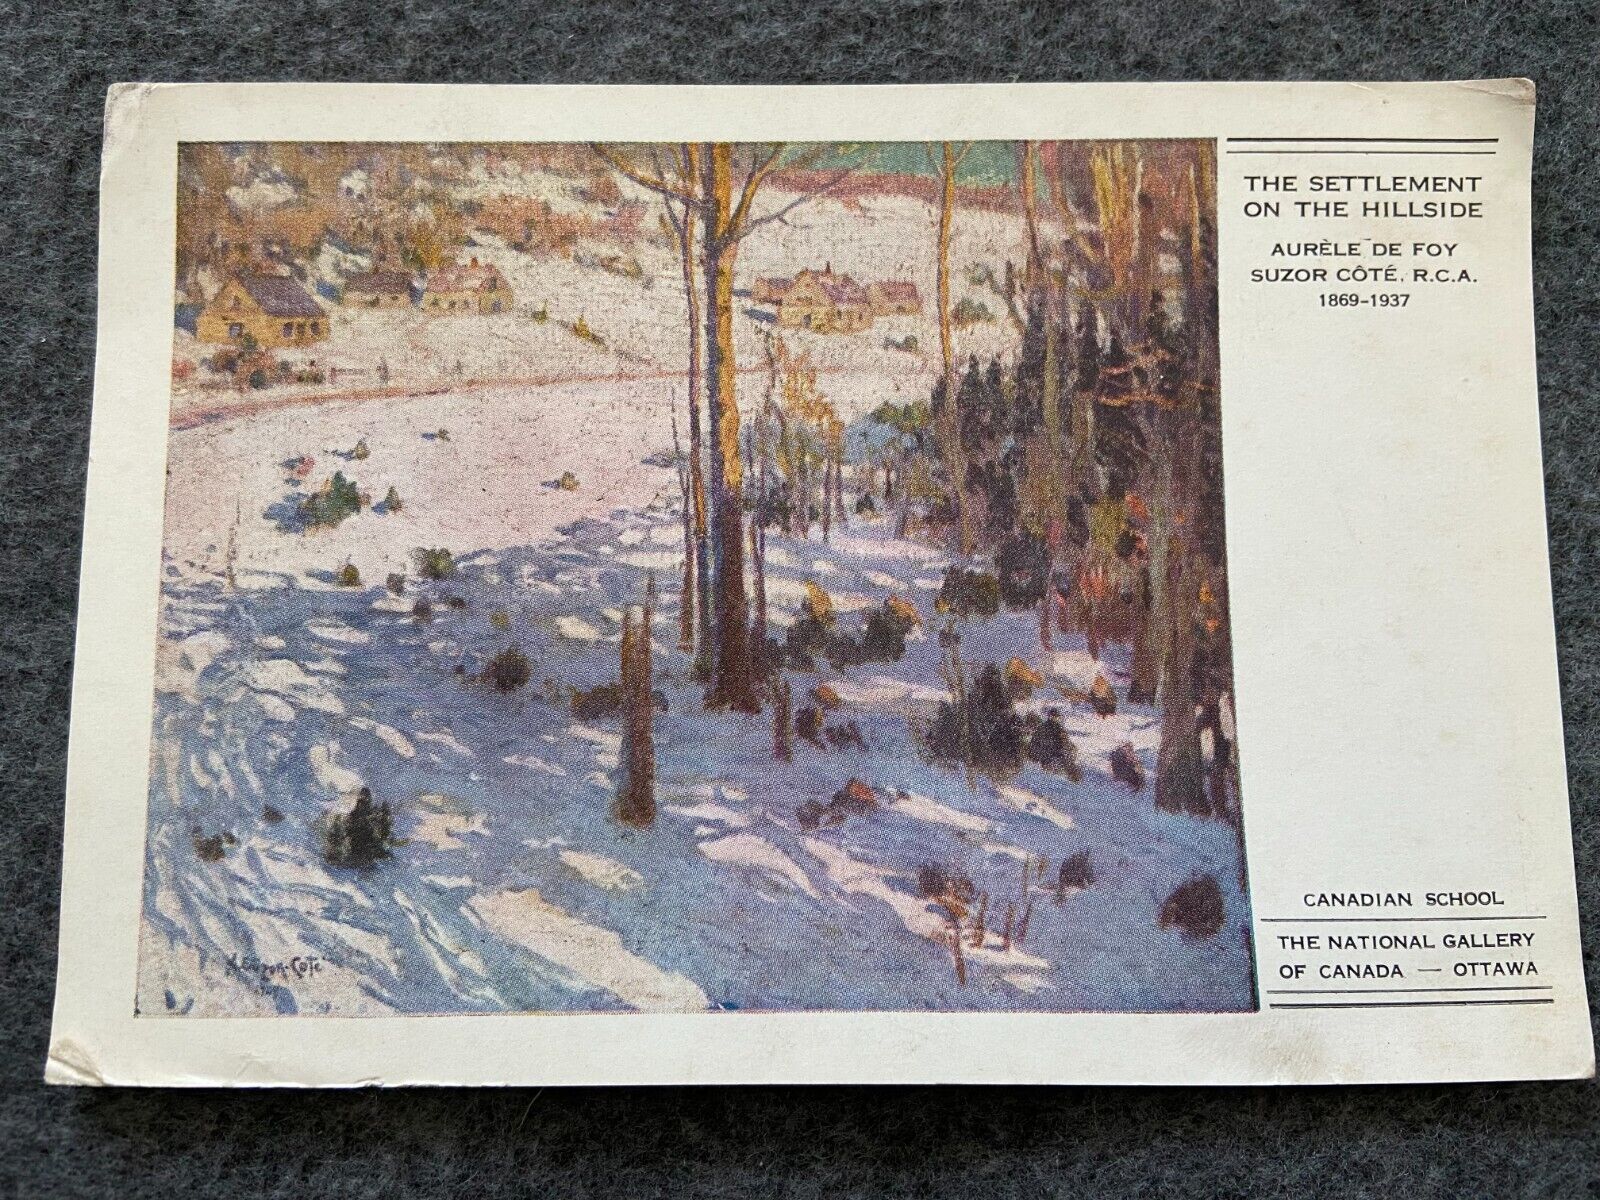 The Settlement On The Hillside, in the National Gallery of Canada Postcard